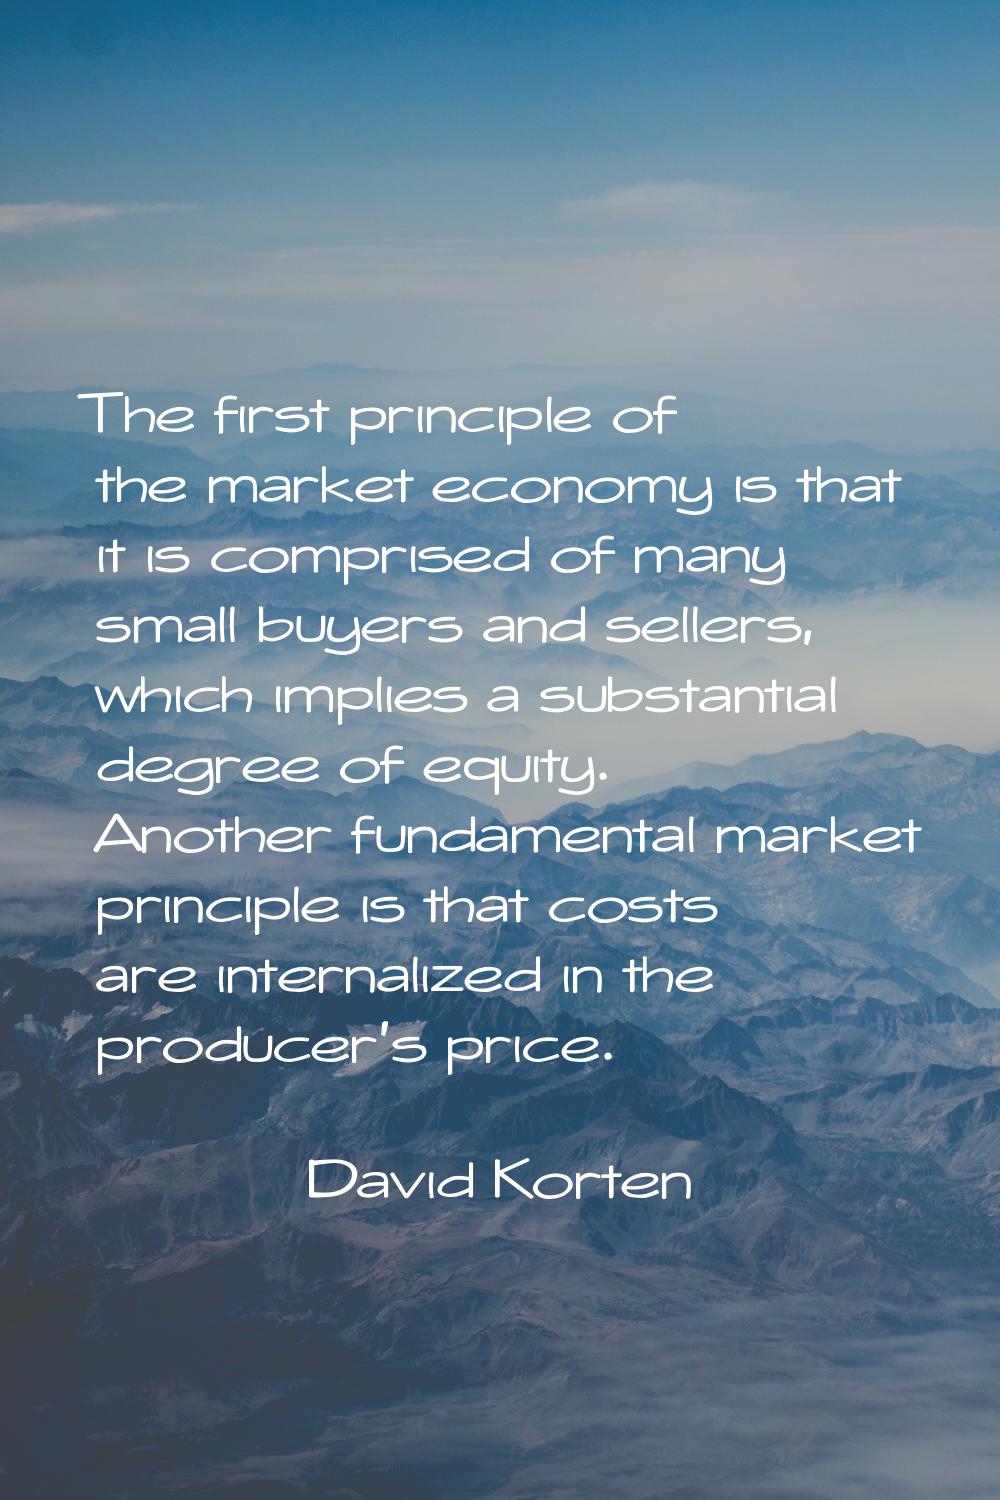 The first principle of the market economy is that it is comprised of many small buyers and sellers,